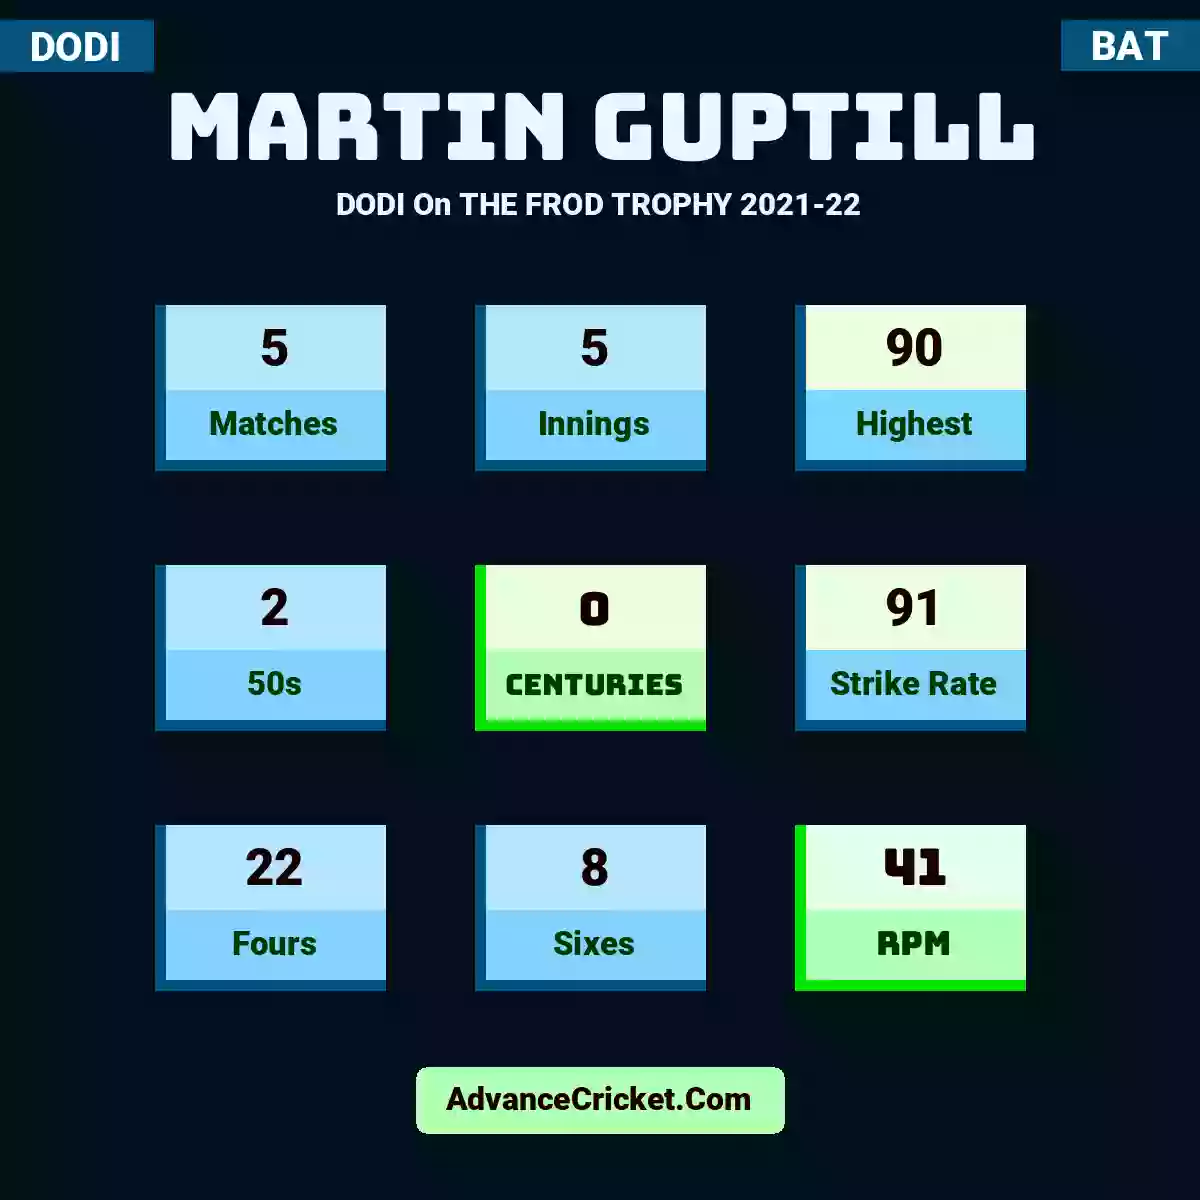 Martin Guptill DODI  On THE FROD TROPHY 2021-22, Martin Guptill played 5 matches, scored 90 runs as highest, 2 half-centuries, and 0 centuries, with a strike rate of 91. M.Guptill hit 22 fours and 8 sixes, with an RPM of 41.